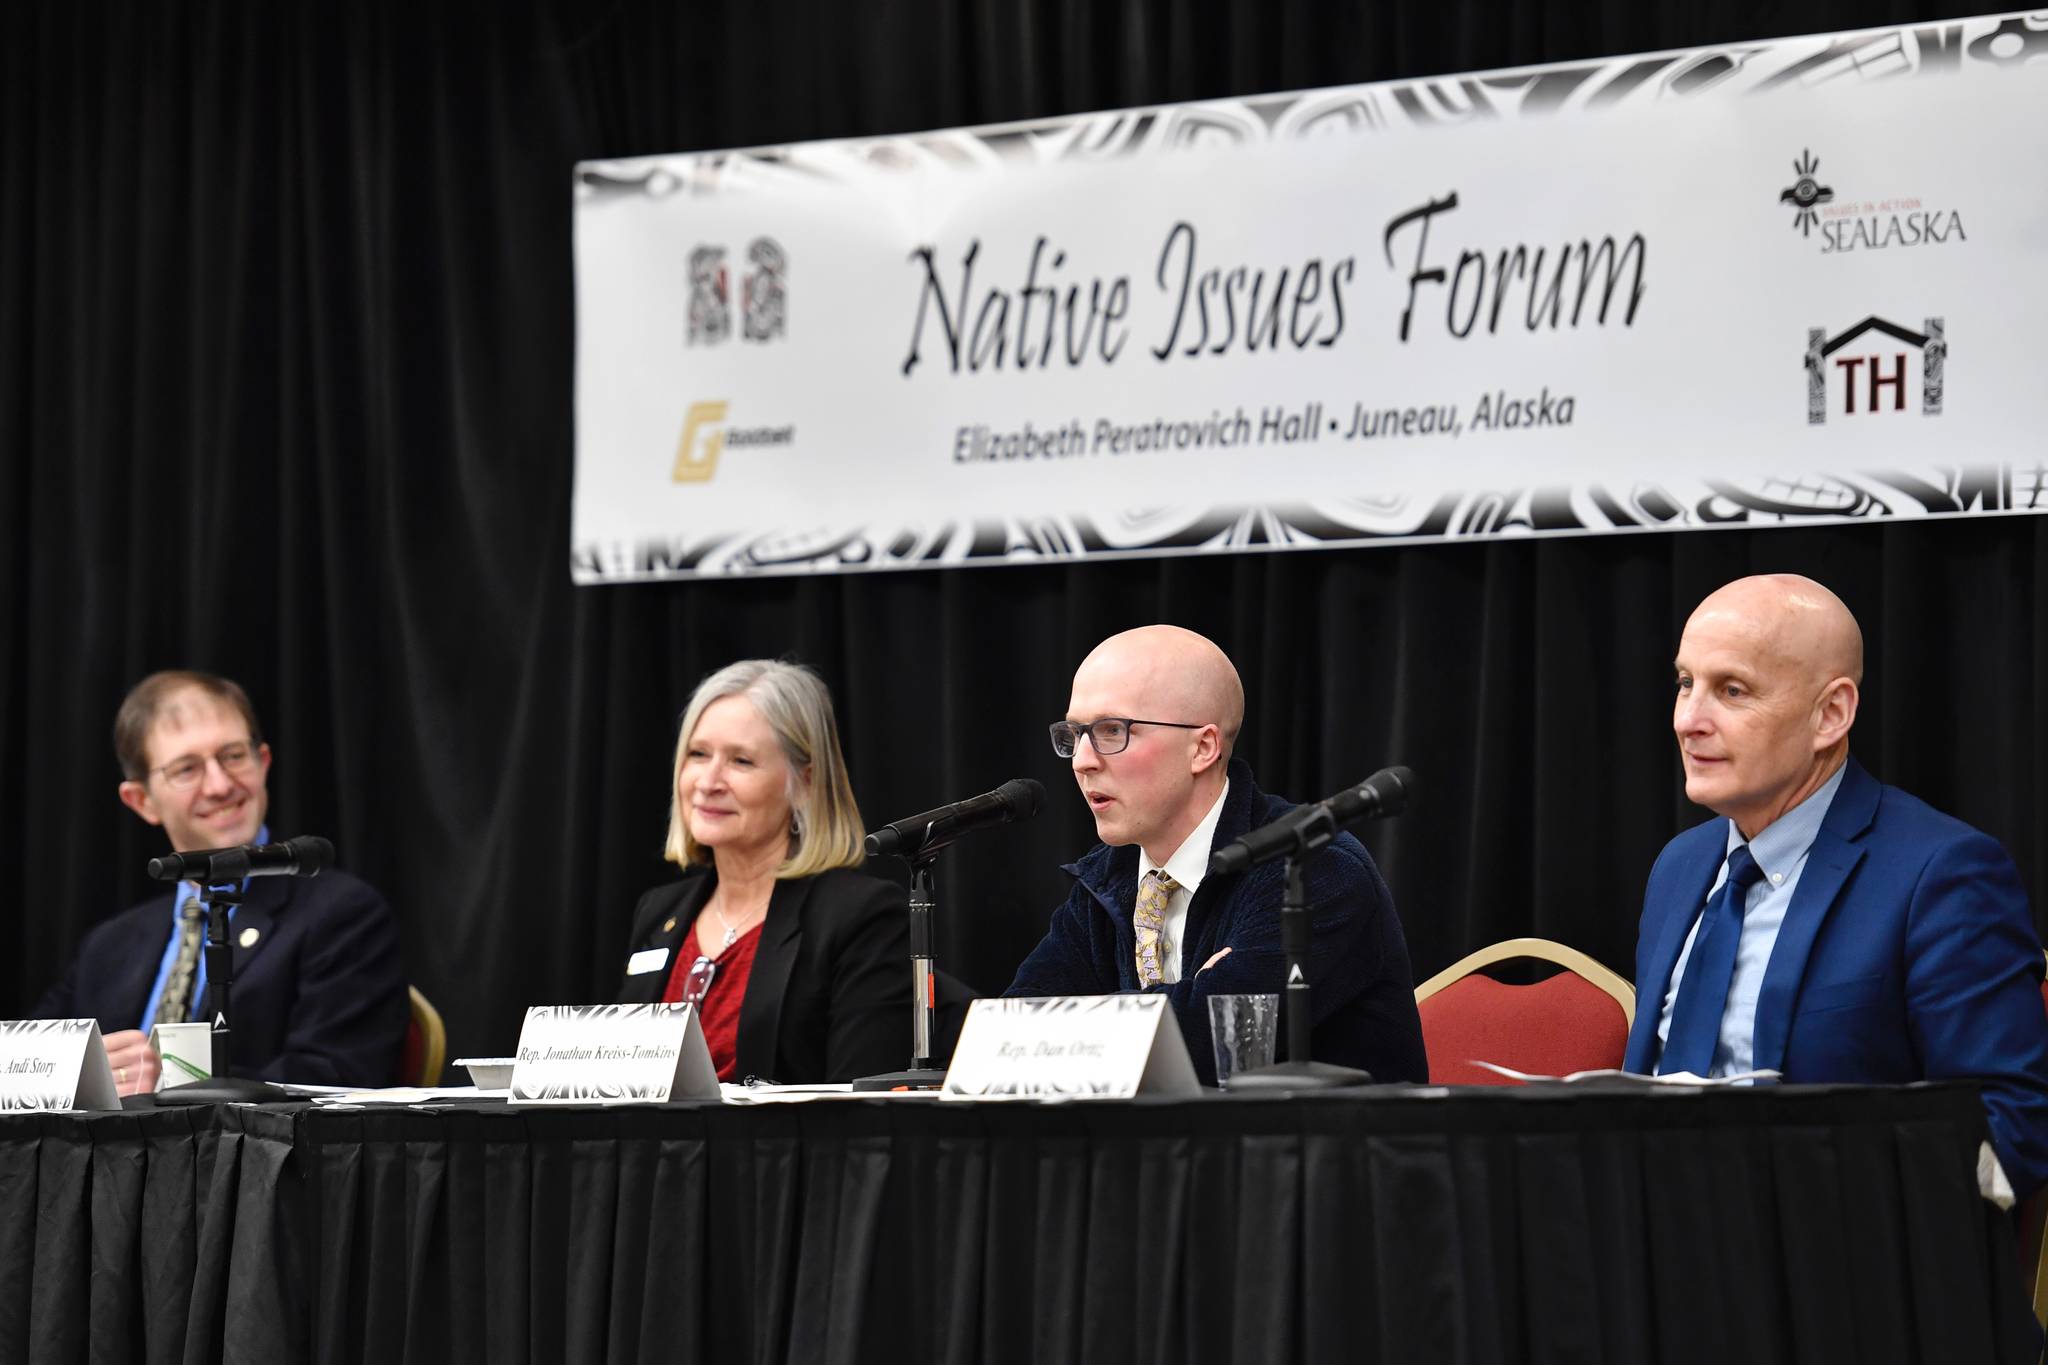 Sen. Jesse Kiehl, D-Juneau, left, Rep. Andi Story, D-Juneau, Rep. Jonathan Kreiss-Tompkins, D-Sitka, and Rep. Dan Ortiz, I-Ketchikan, right, speak at the Native Issues Forum in the Elizabeth Peratrovich Hall on Wednesday, March 13, 2019. (Michael Penn | Juneau Empire)